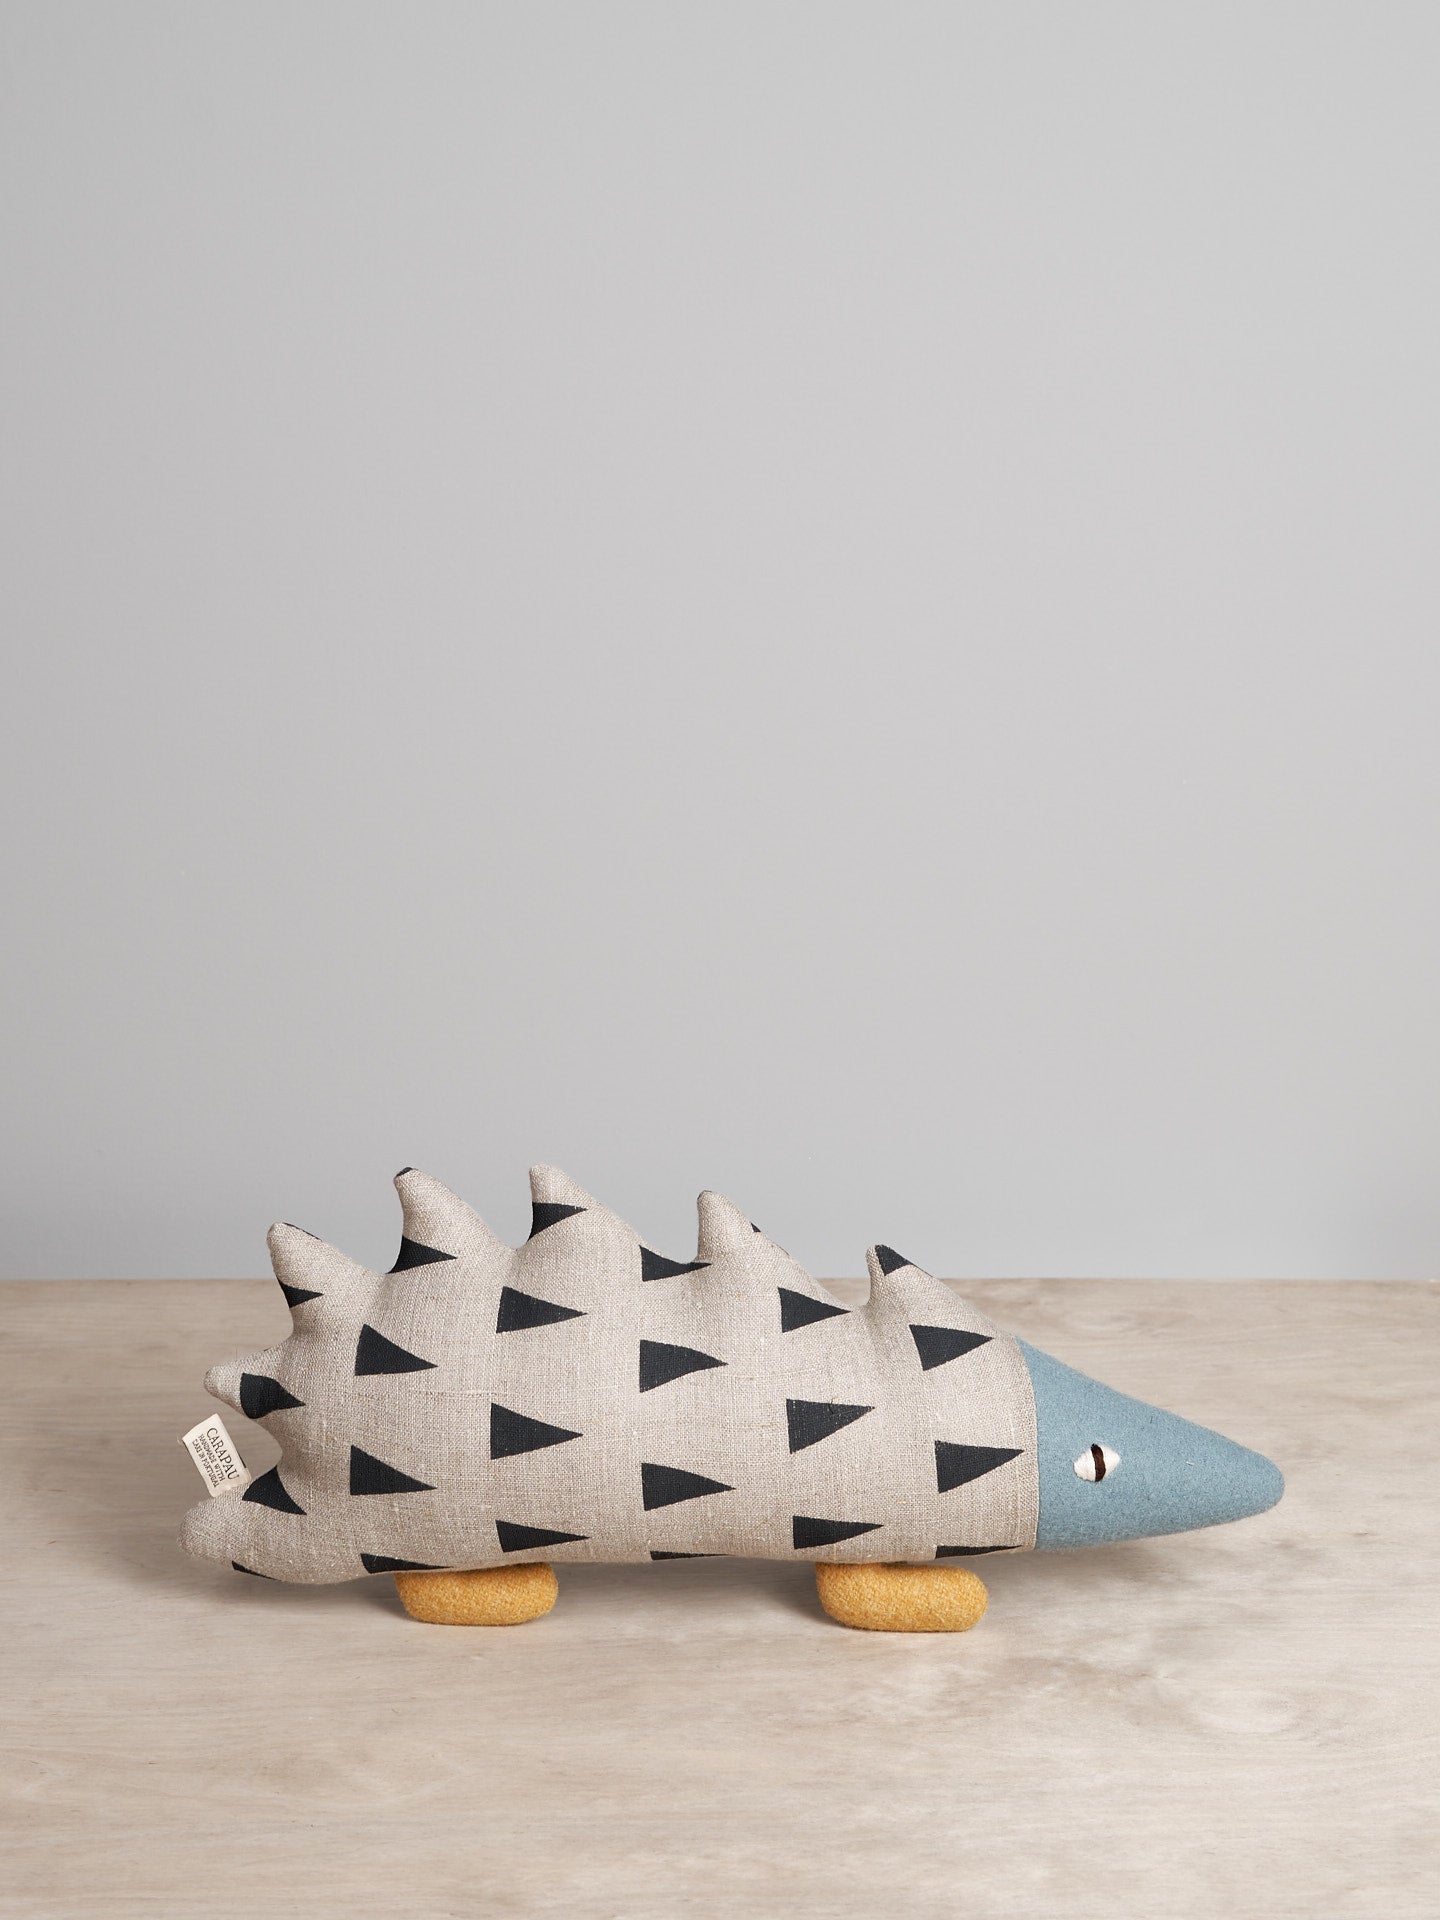 A JIN, the Amur Hedgehog toy sitting on a wooden table, made by Carapau.